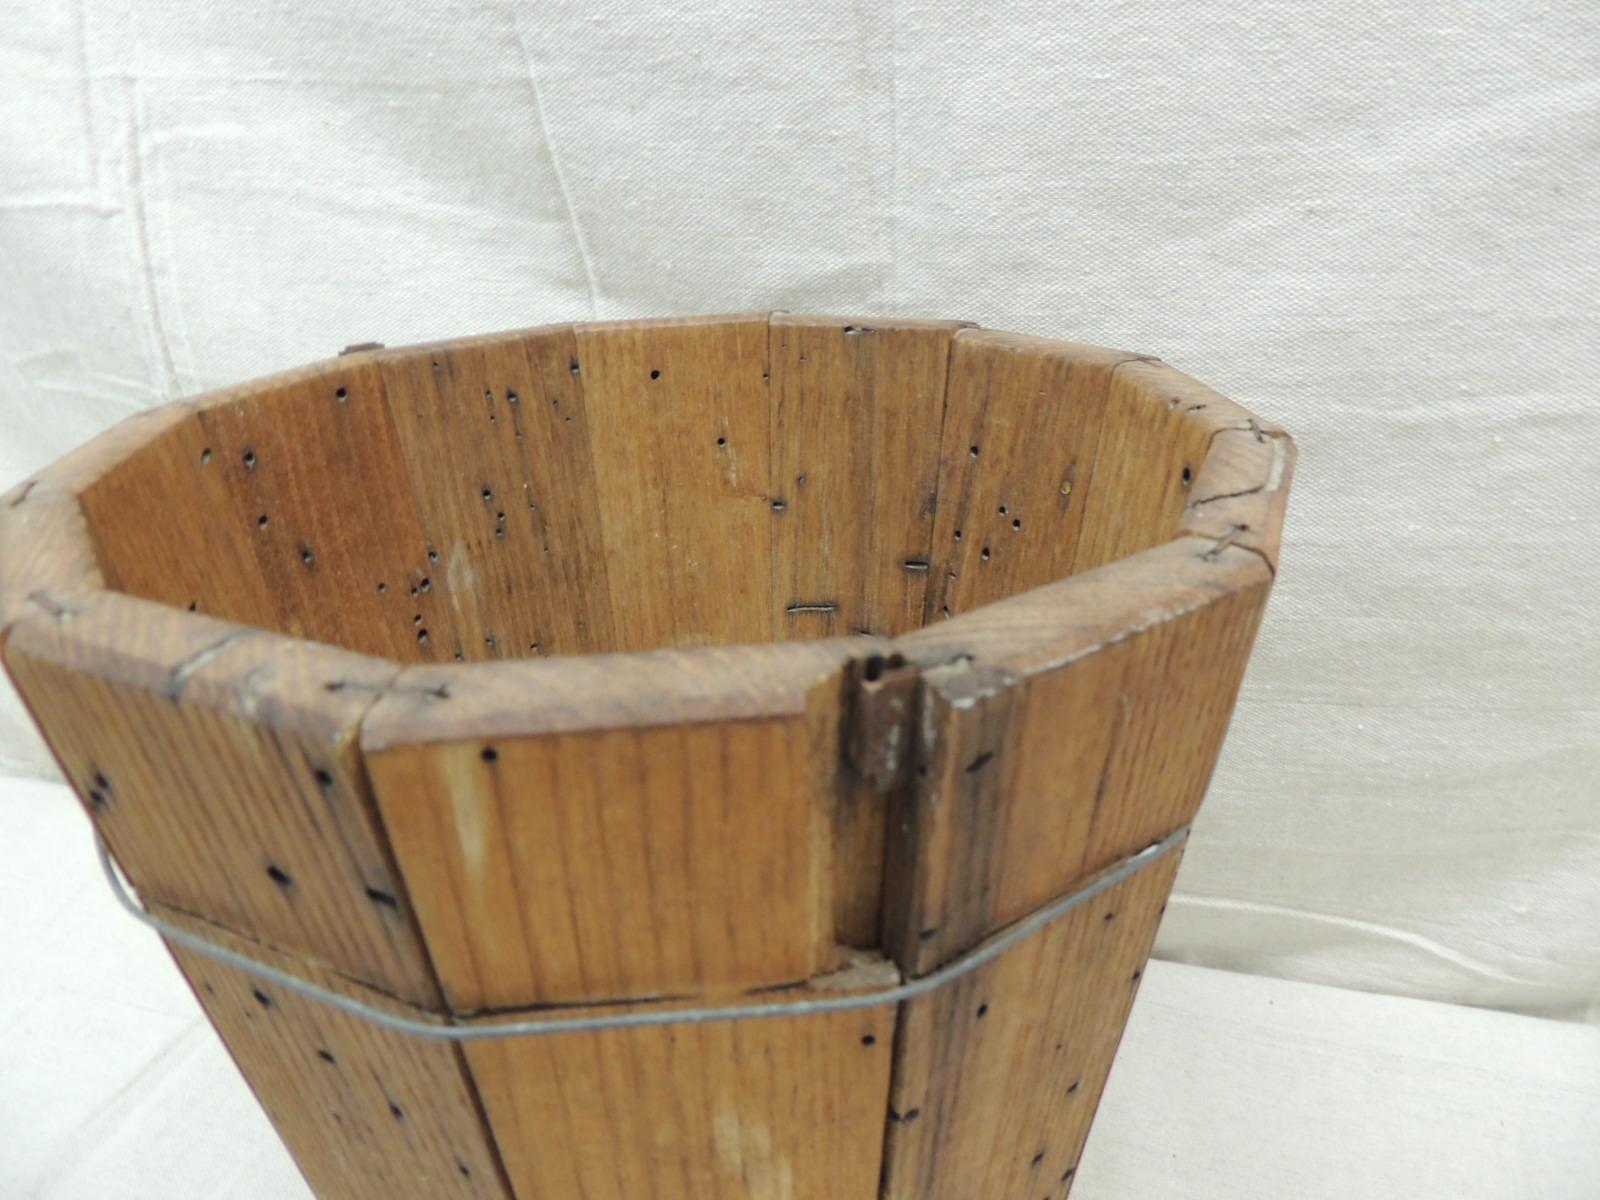 Country Vintage Artisanal Wood and Wire Barrel Style Wastebasket